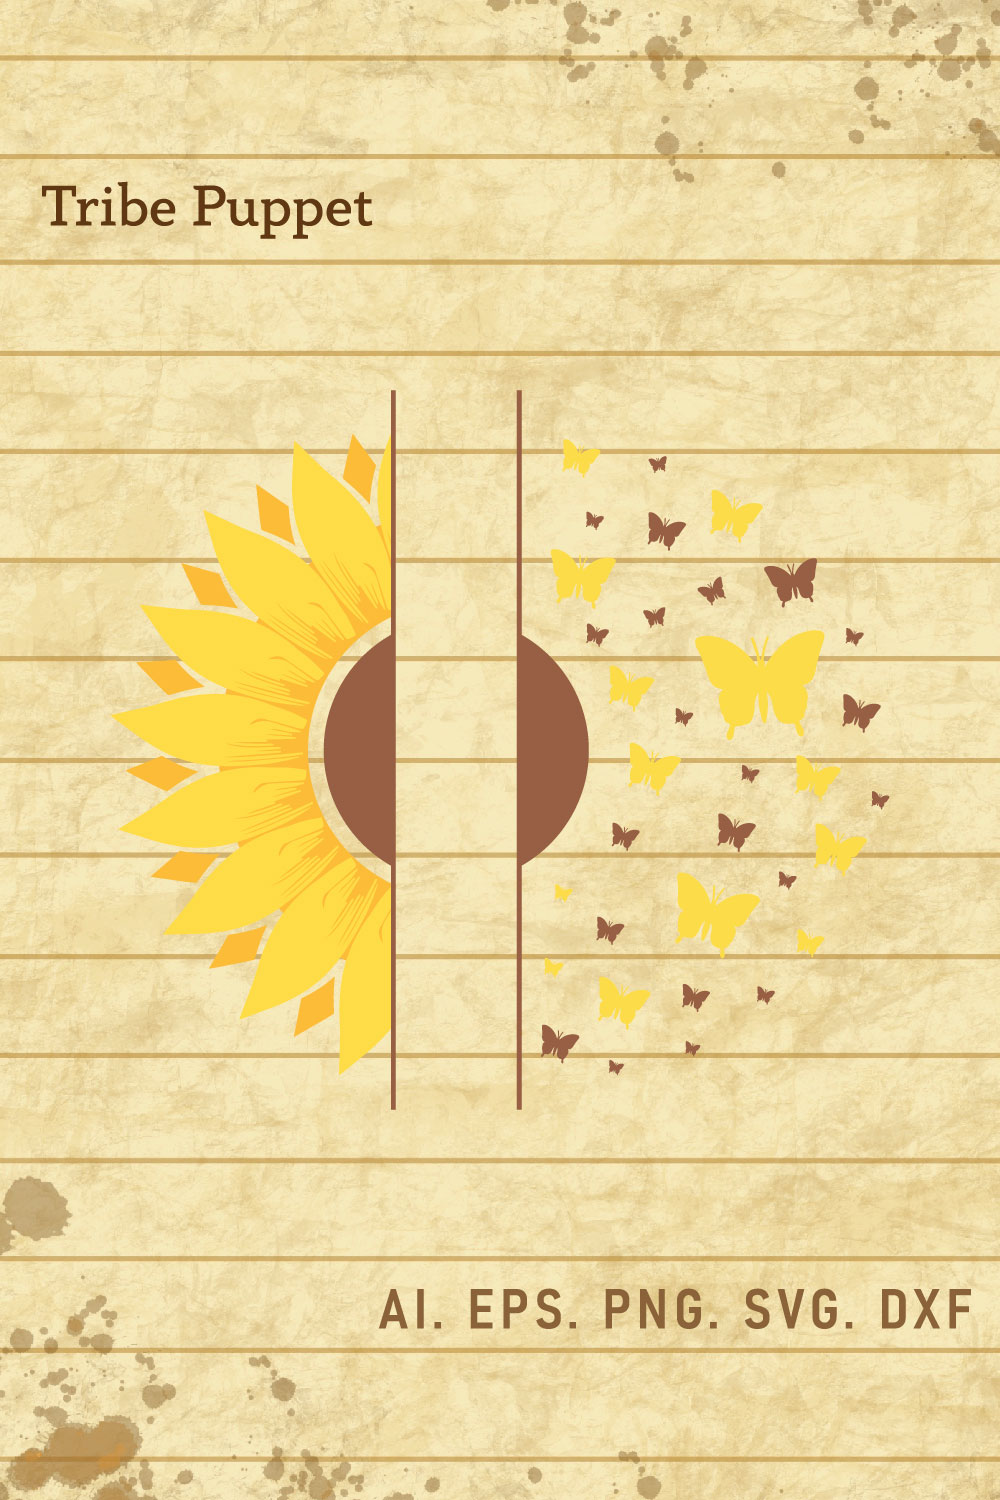 Sunflower 33 pinterest preview image.